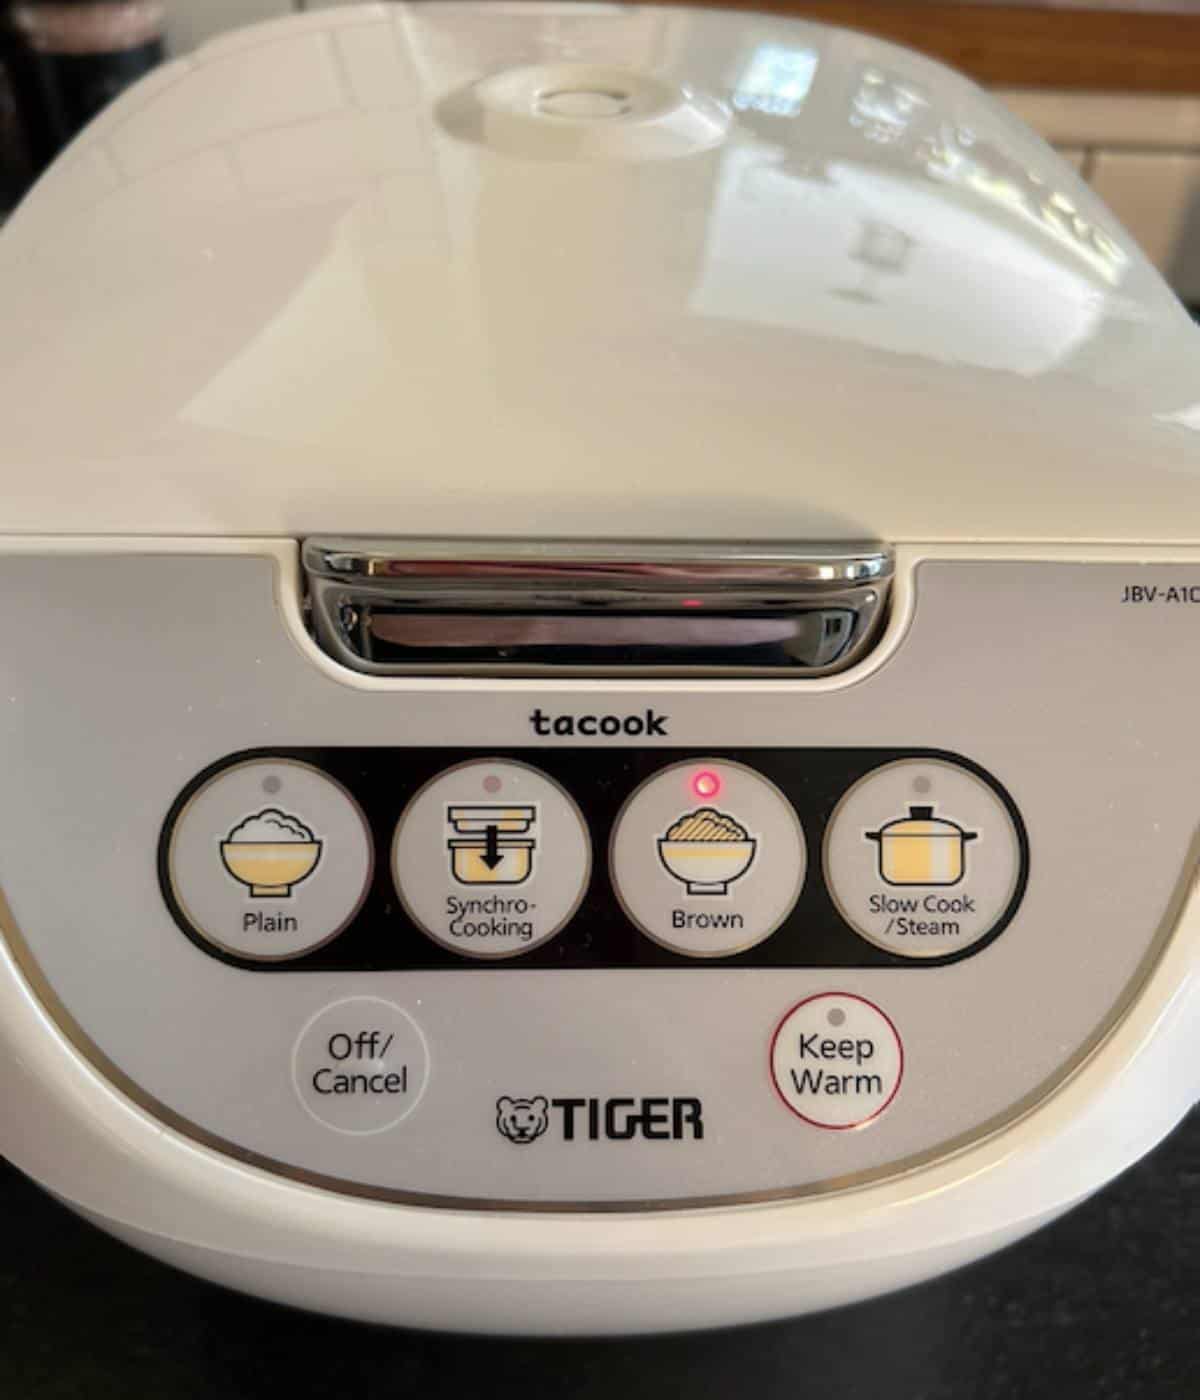 Rice cooker with brown rice selected.